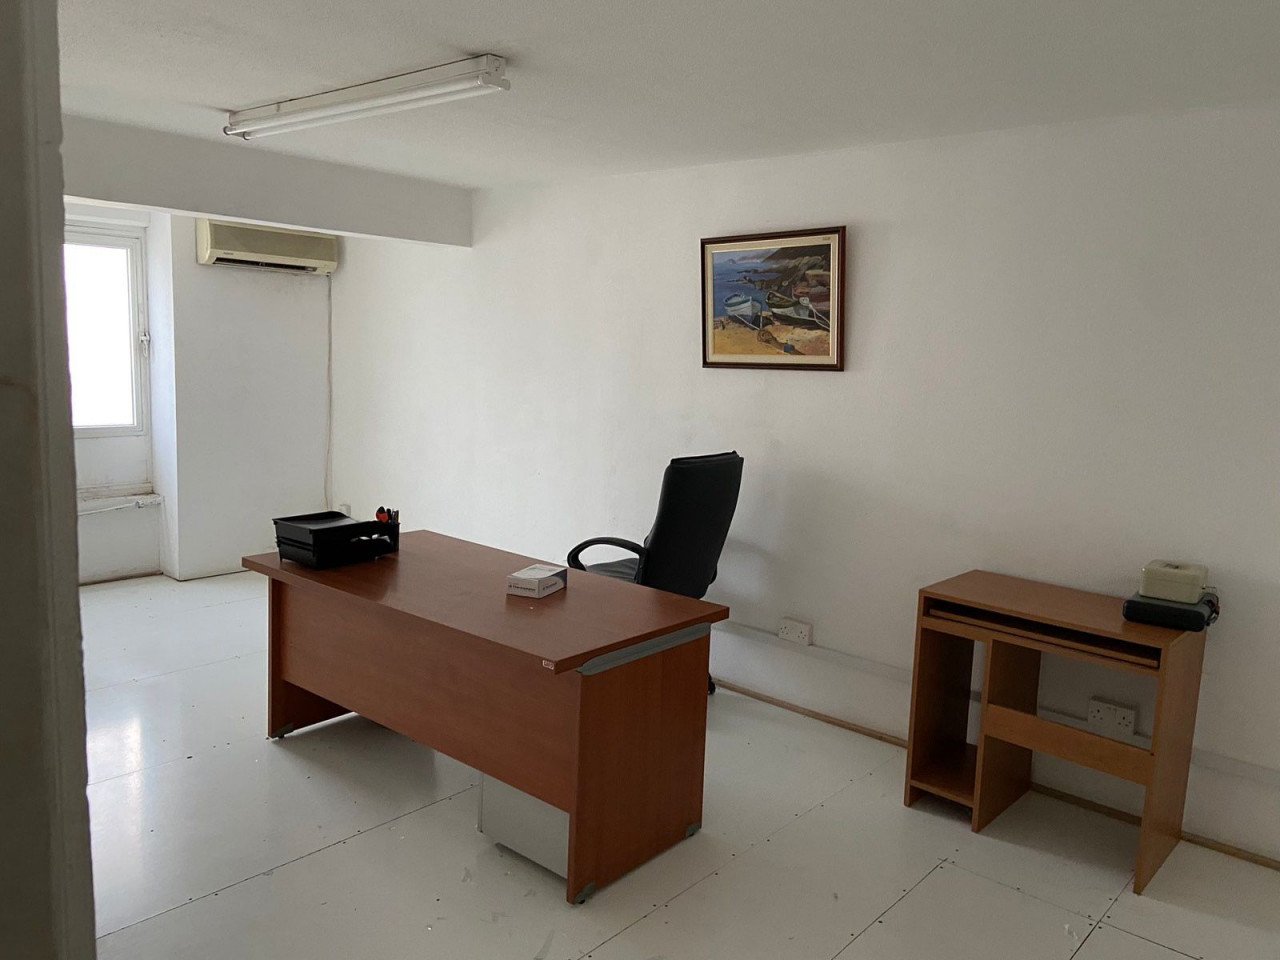 Property for Rent: Commercial (Shop) in Molos Area, Limassol for Rent | Key Realtor Cyprus